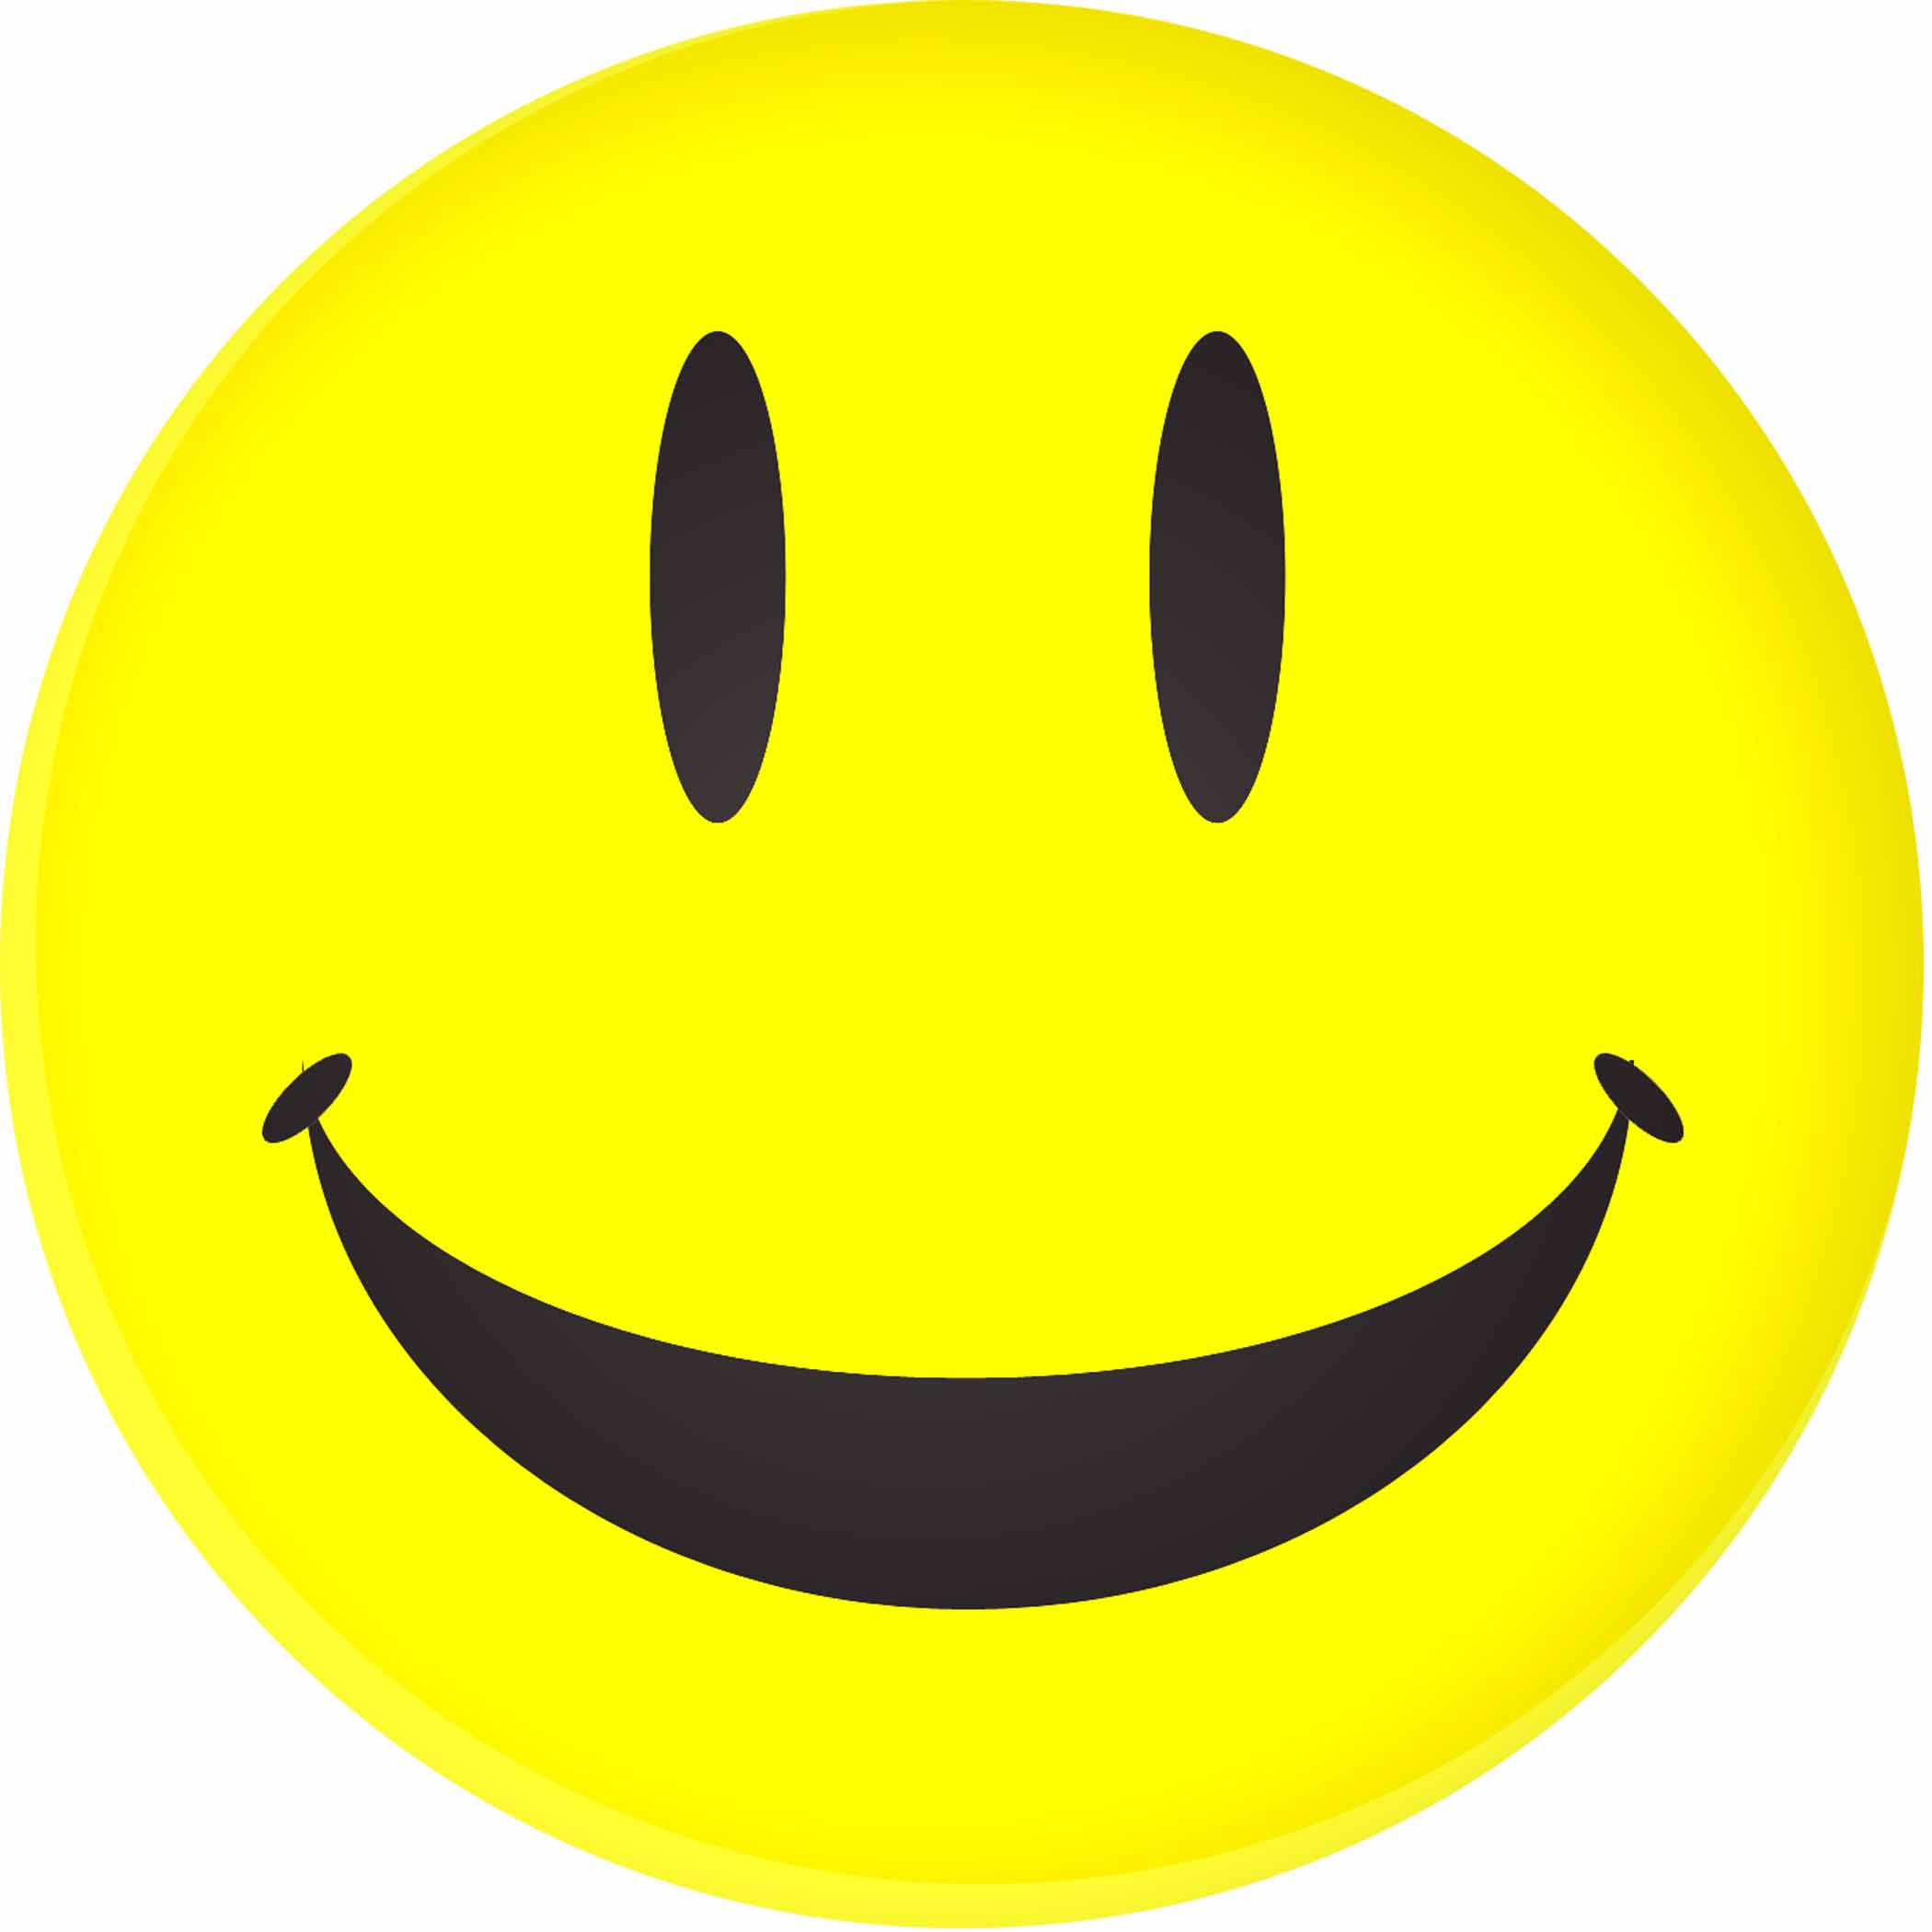 Animated Smiley Faces Clip Art - Clipart library